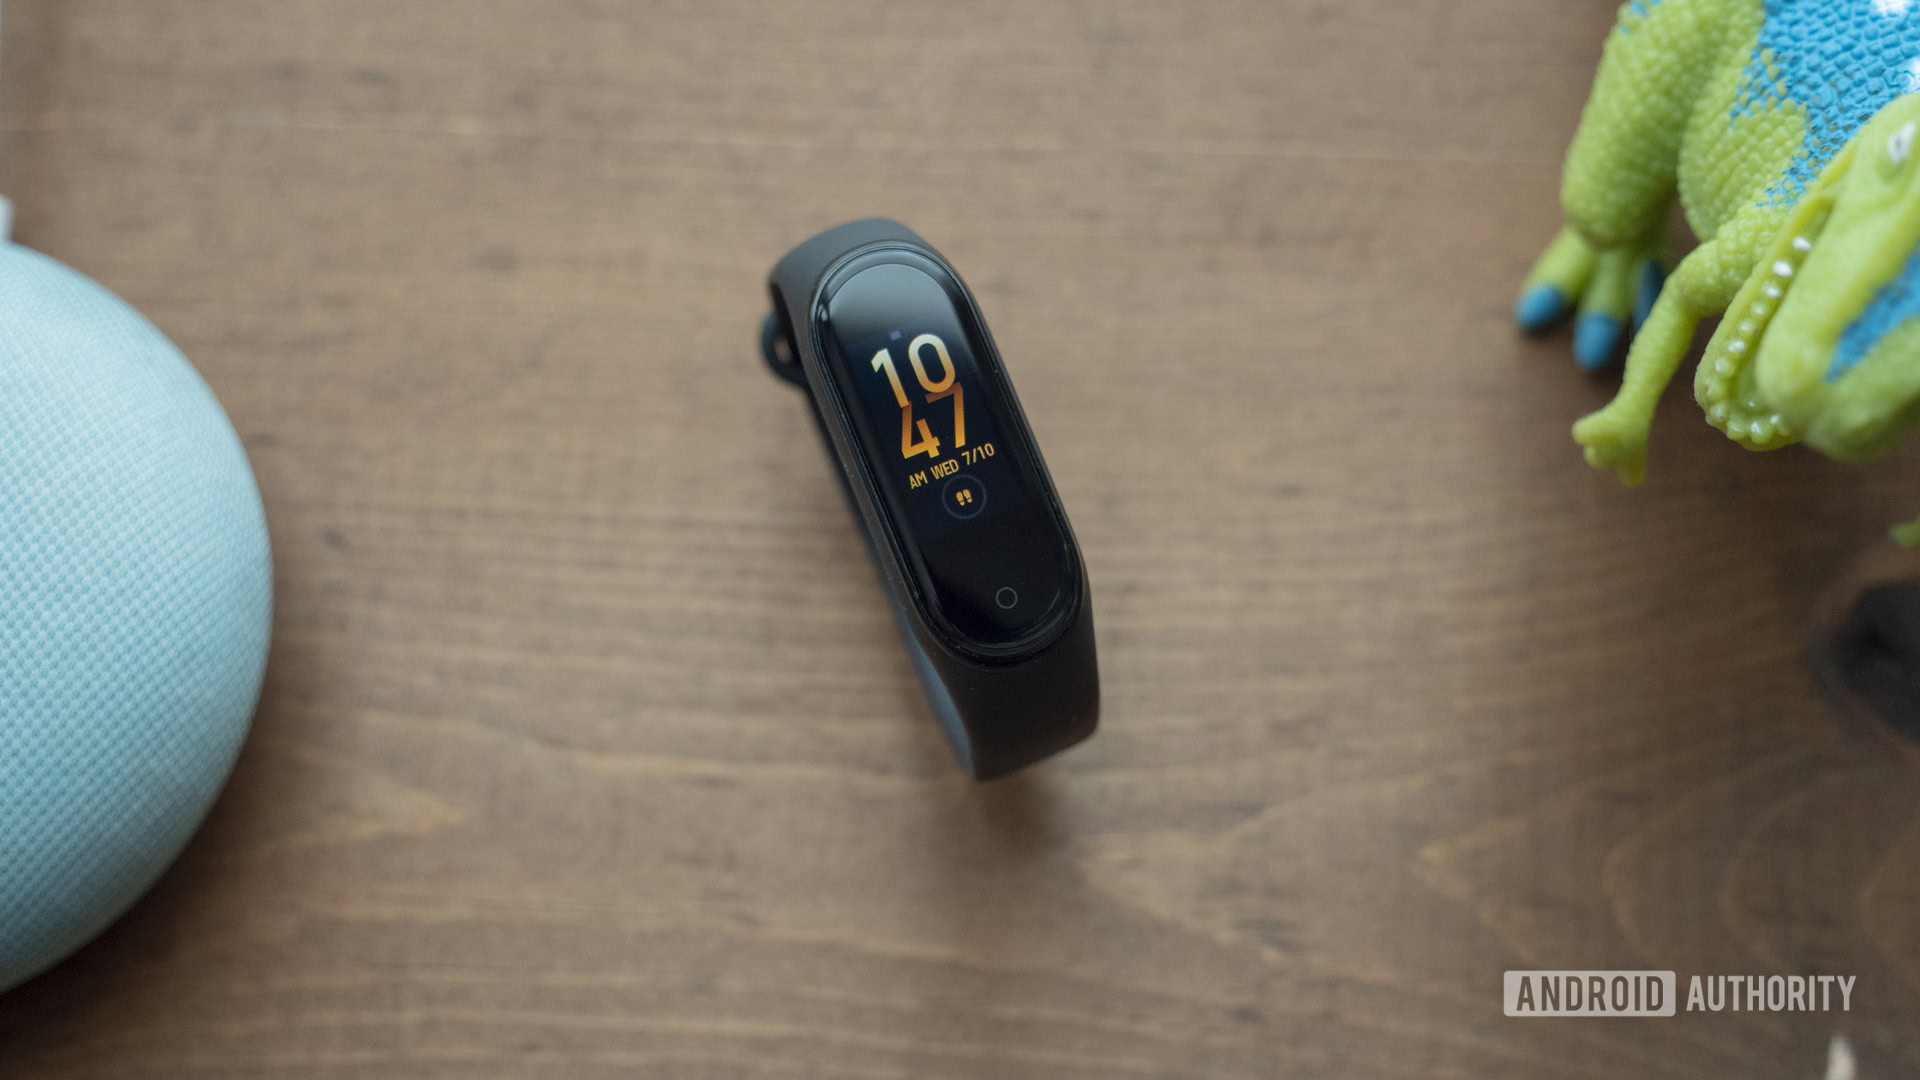 Does the Xiaomi Mi Band 5 work with Mi Band 4 bands? - Android Authority